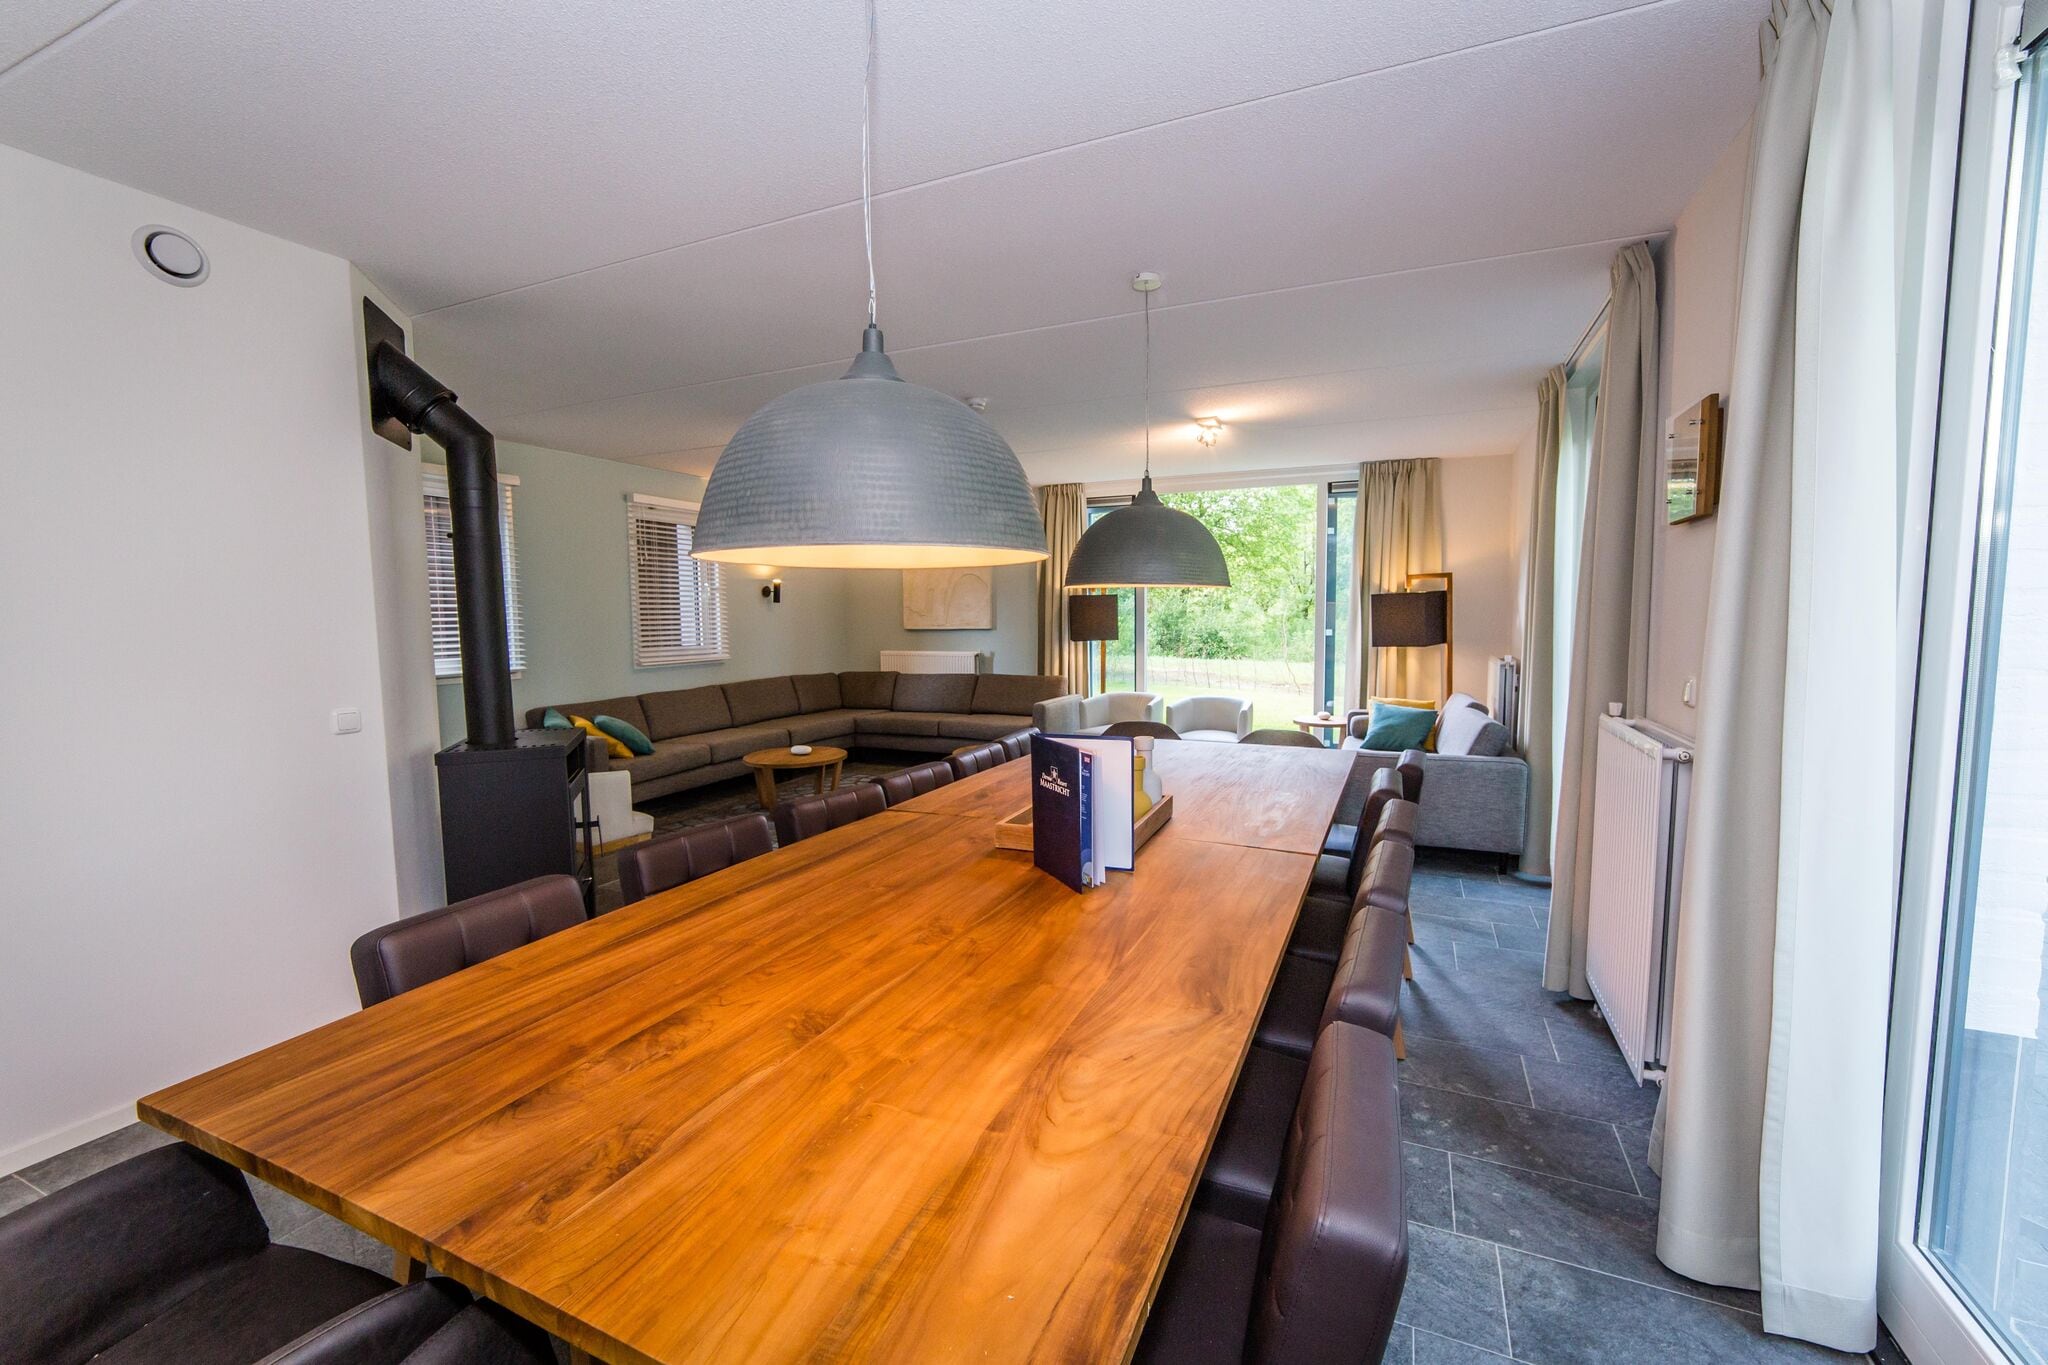 Lush holiday home 4km from Maastricht